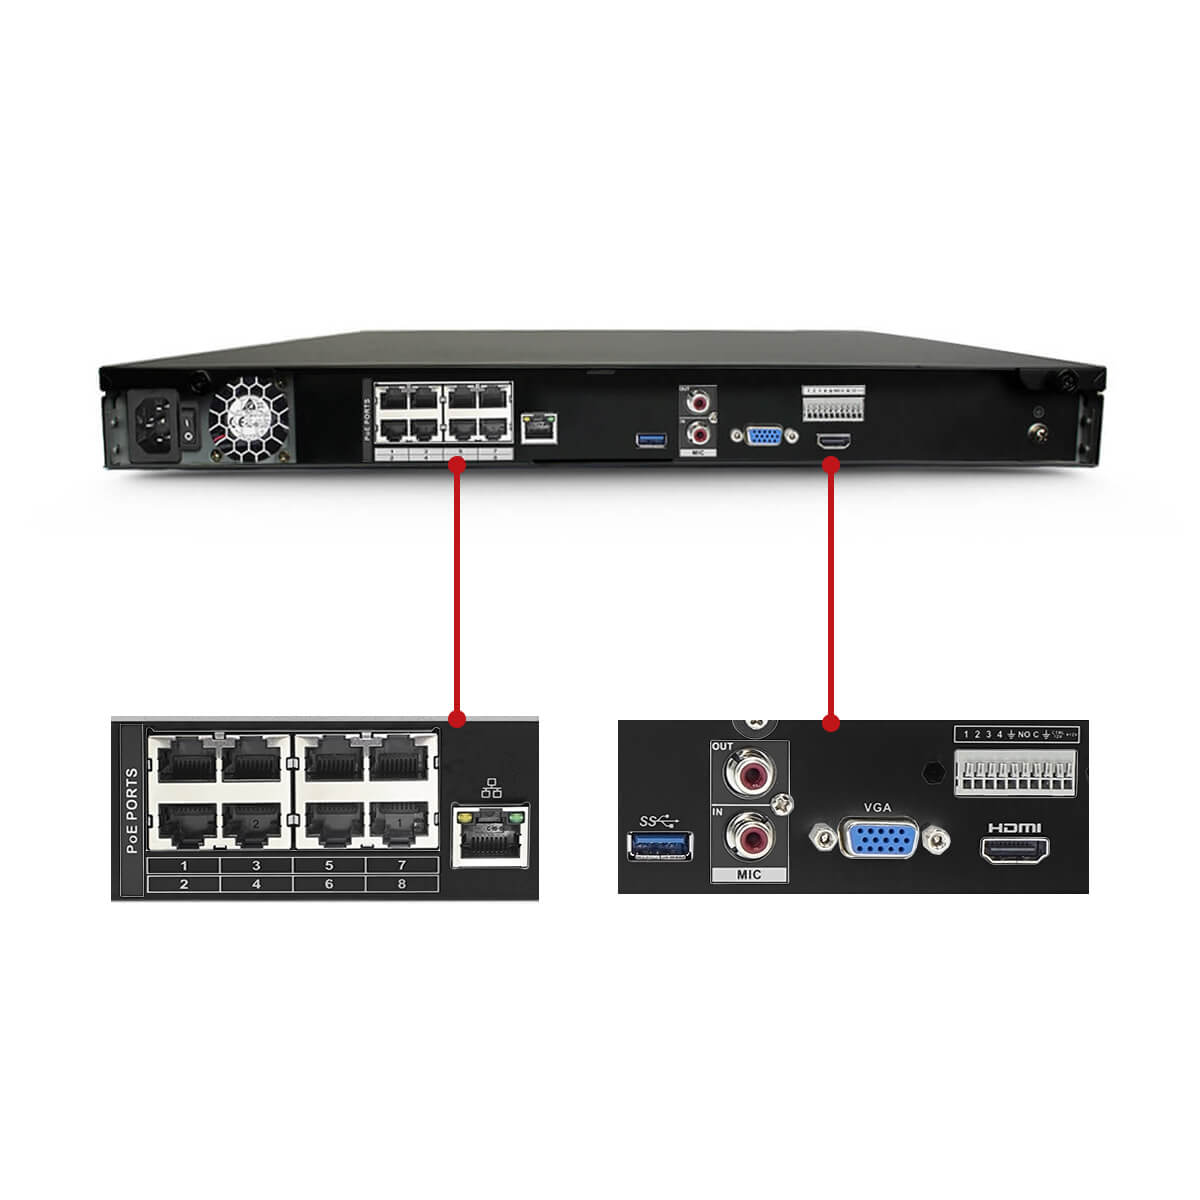 Black 80Mbps Throughput IC Realtime NVR-208NS 8 Channel 1U NVR Supports 8MP Resolution H.264 Integrated 8 Port POE Switch HDMI Up to 6TB 